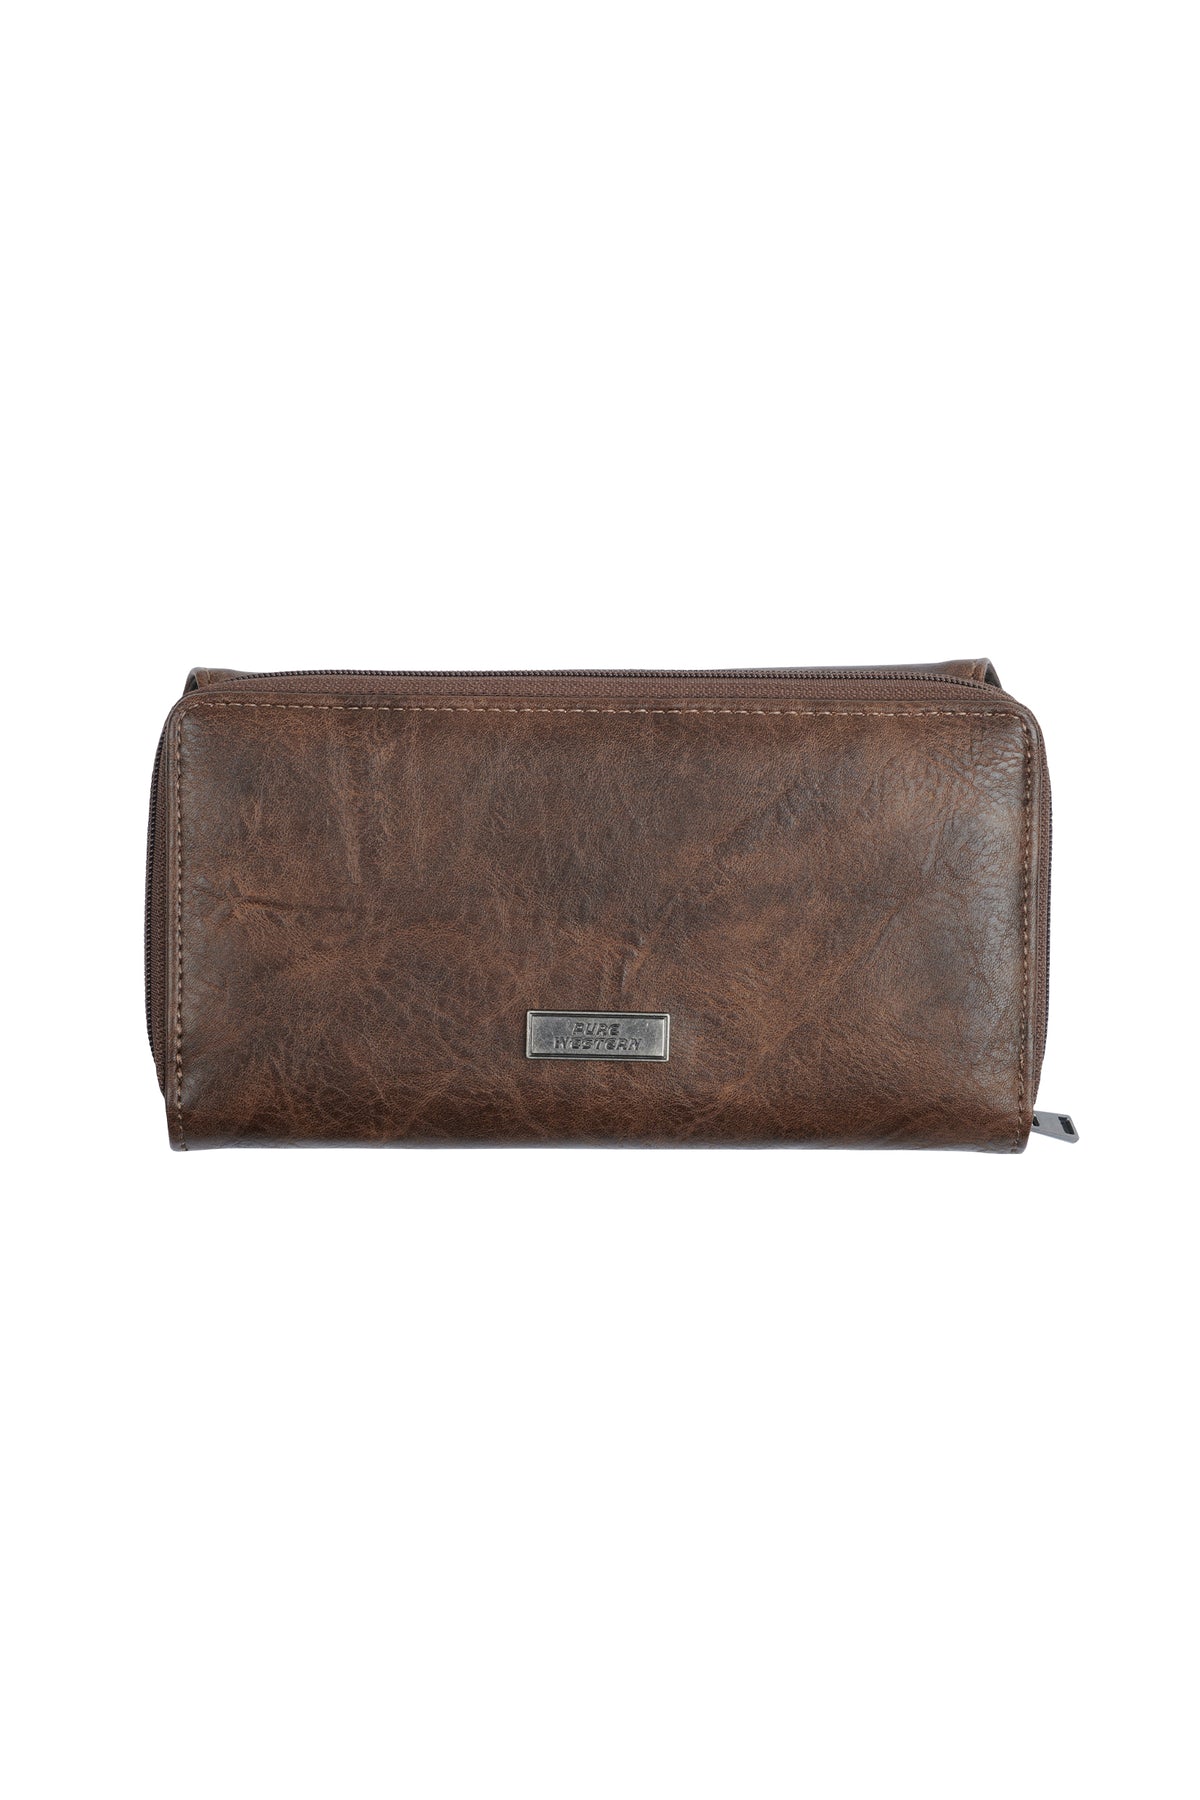 Pure Western Paige Wallet - Chocolate